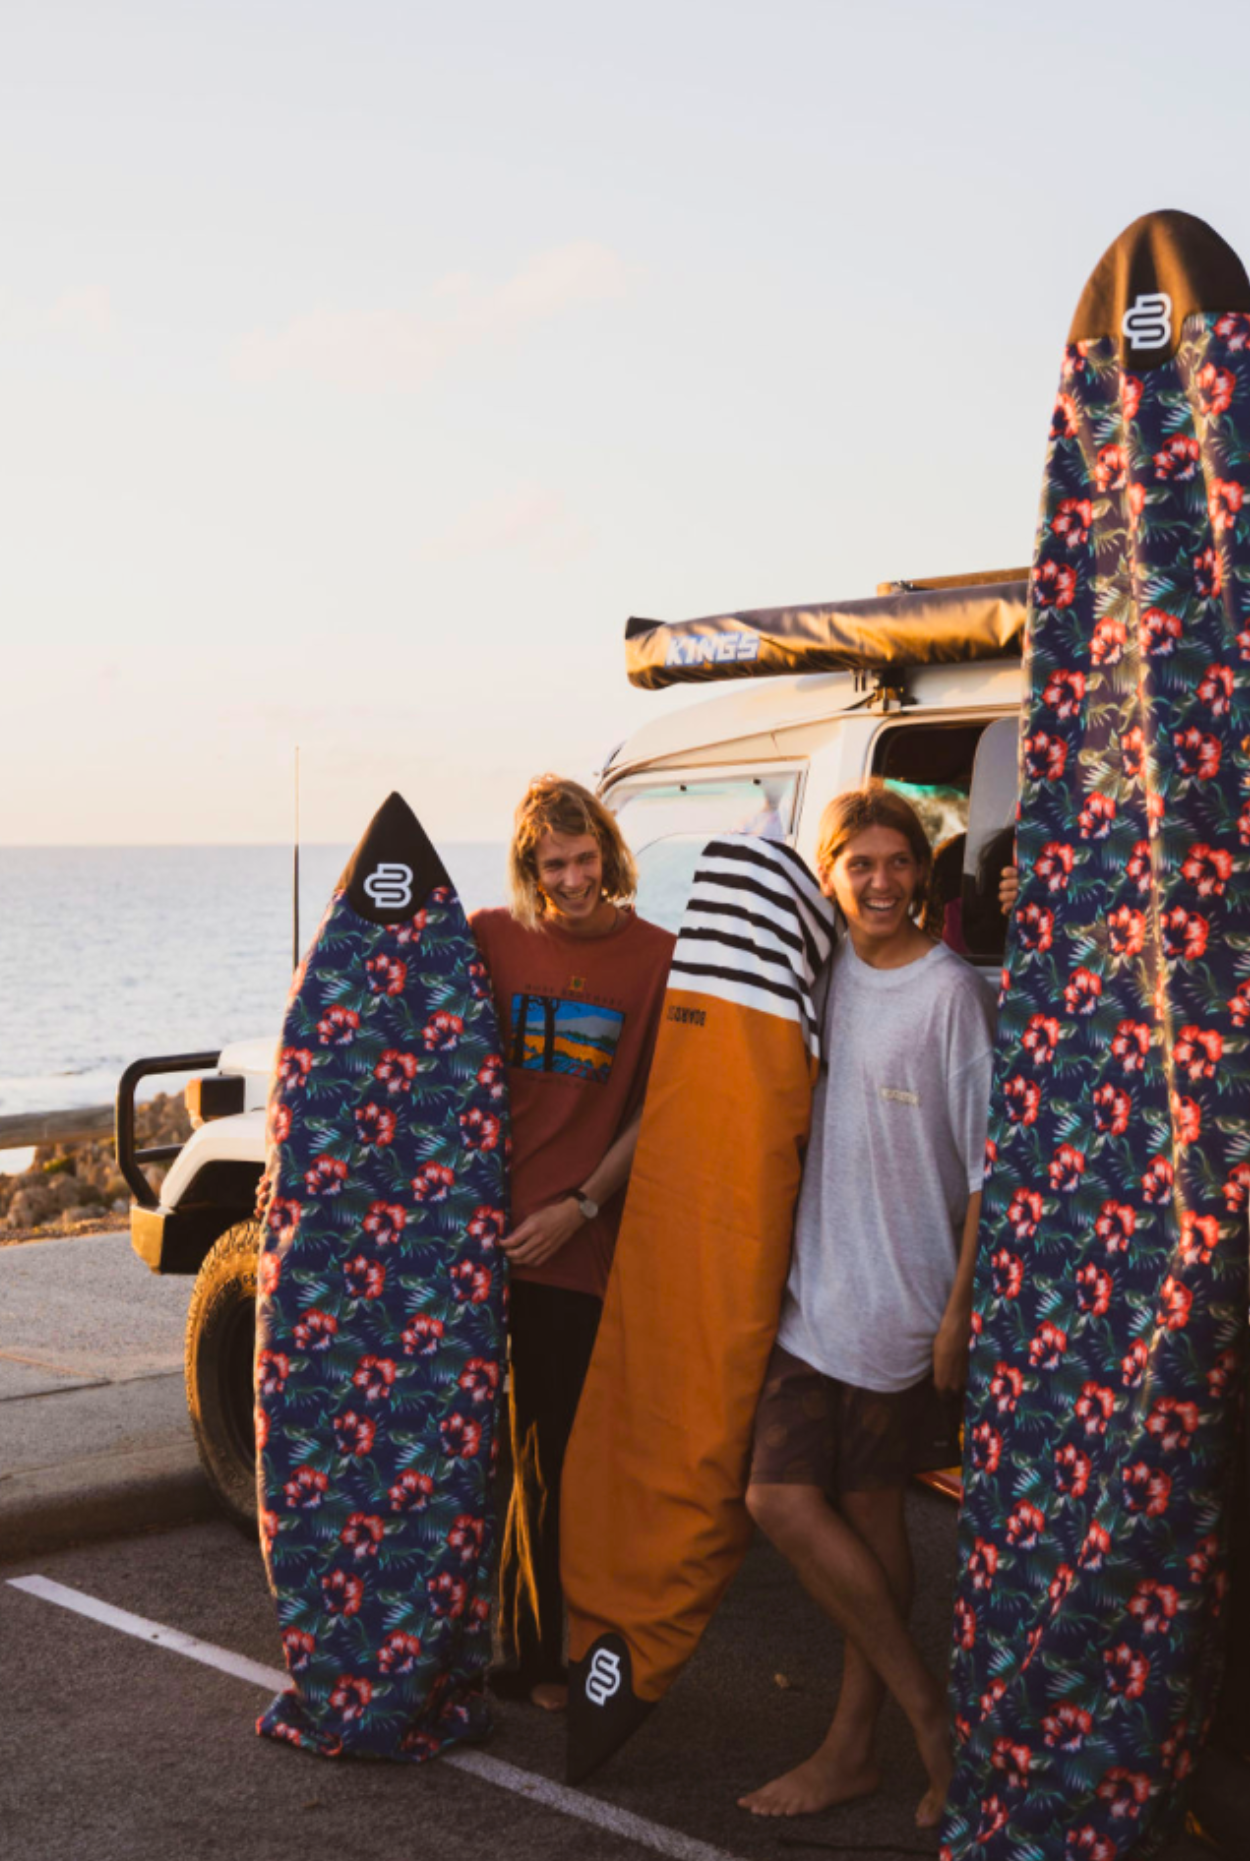 The Kelly Fun / Fish Surfboard Cover